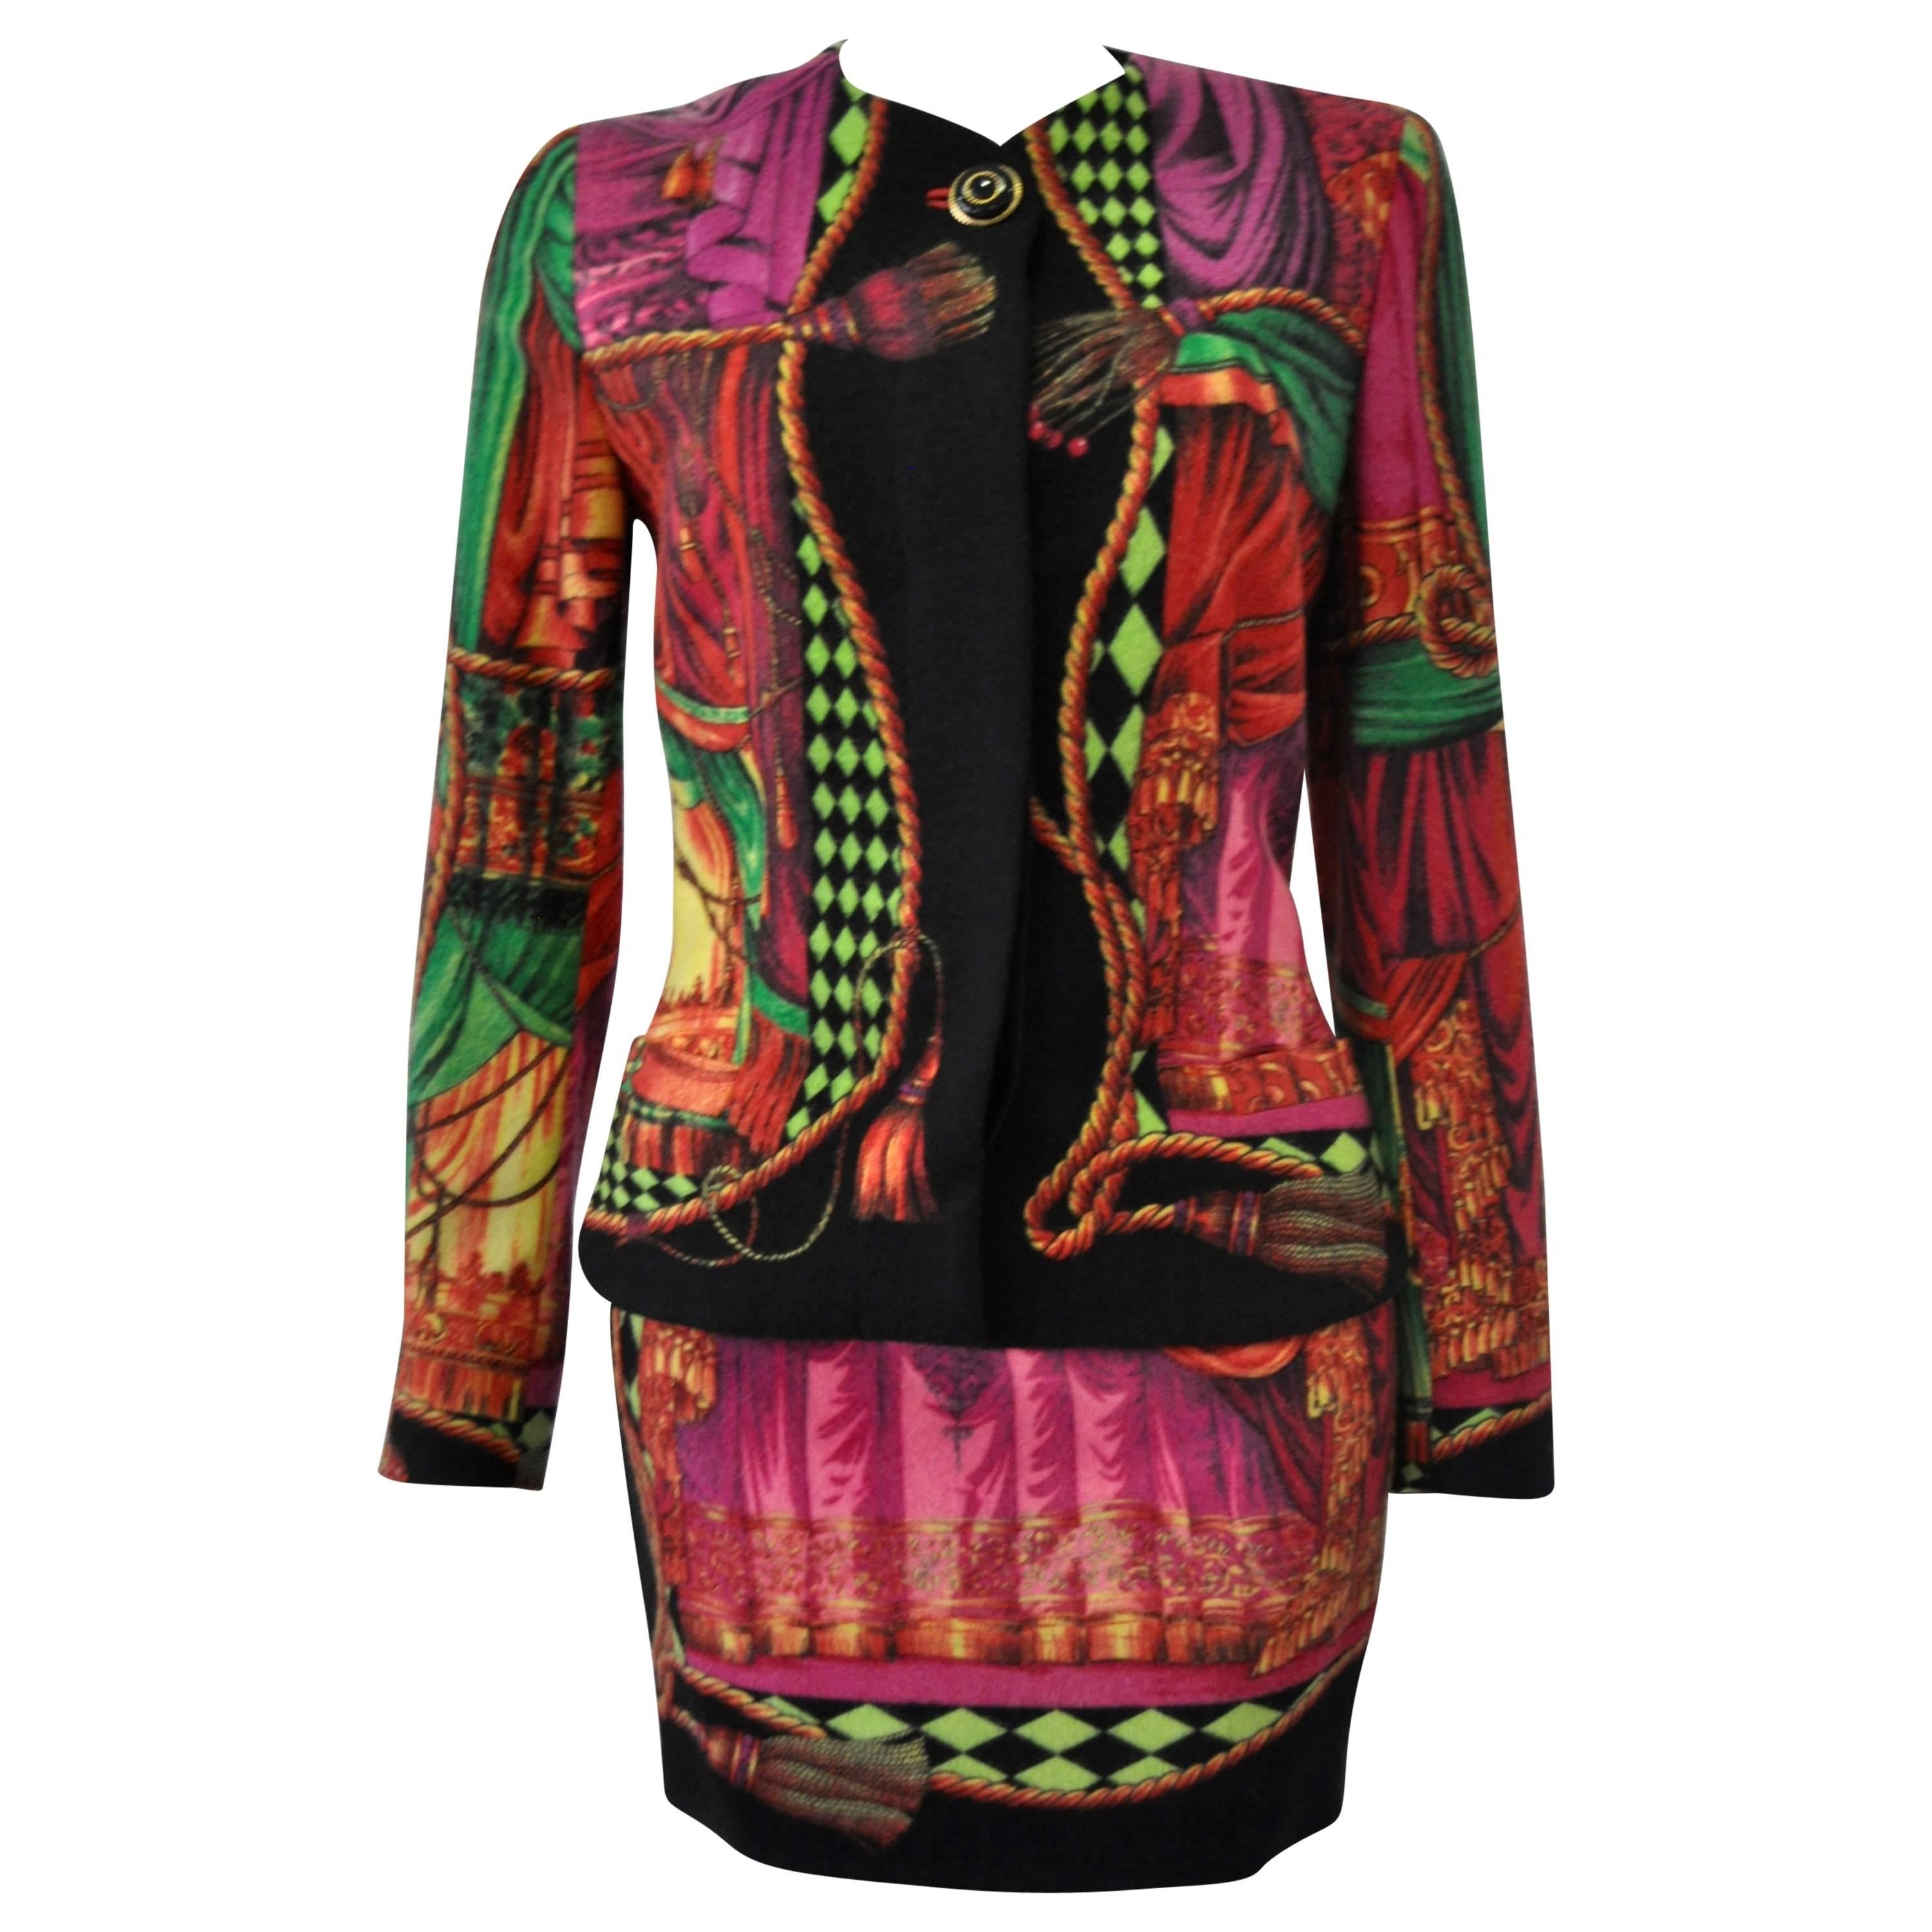 Important and Iconic Gianni Versace 'Teatro' Collection Wool Felt Suit For Sale